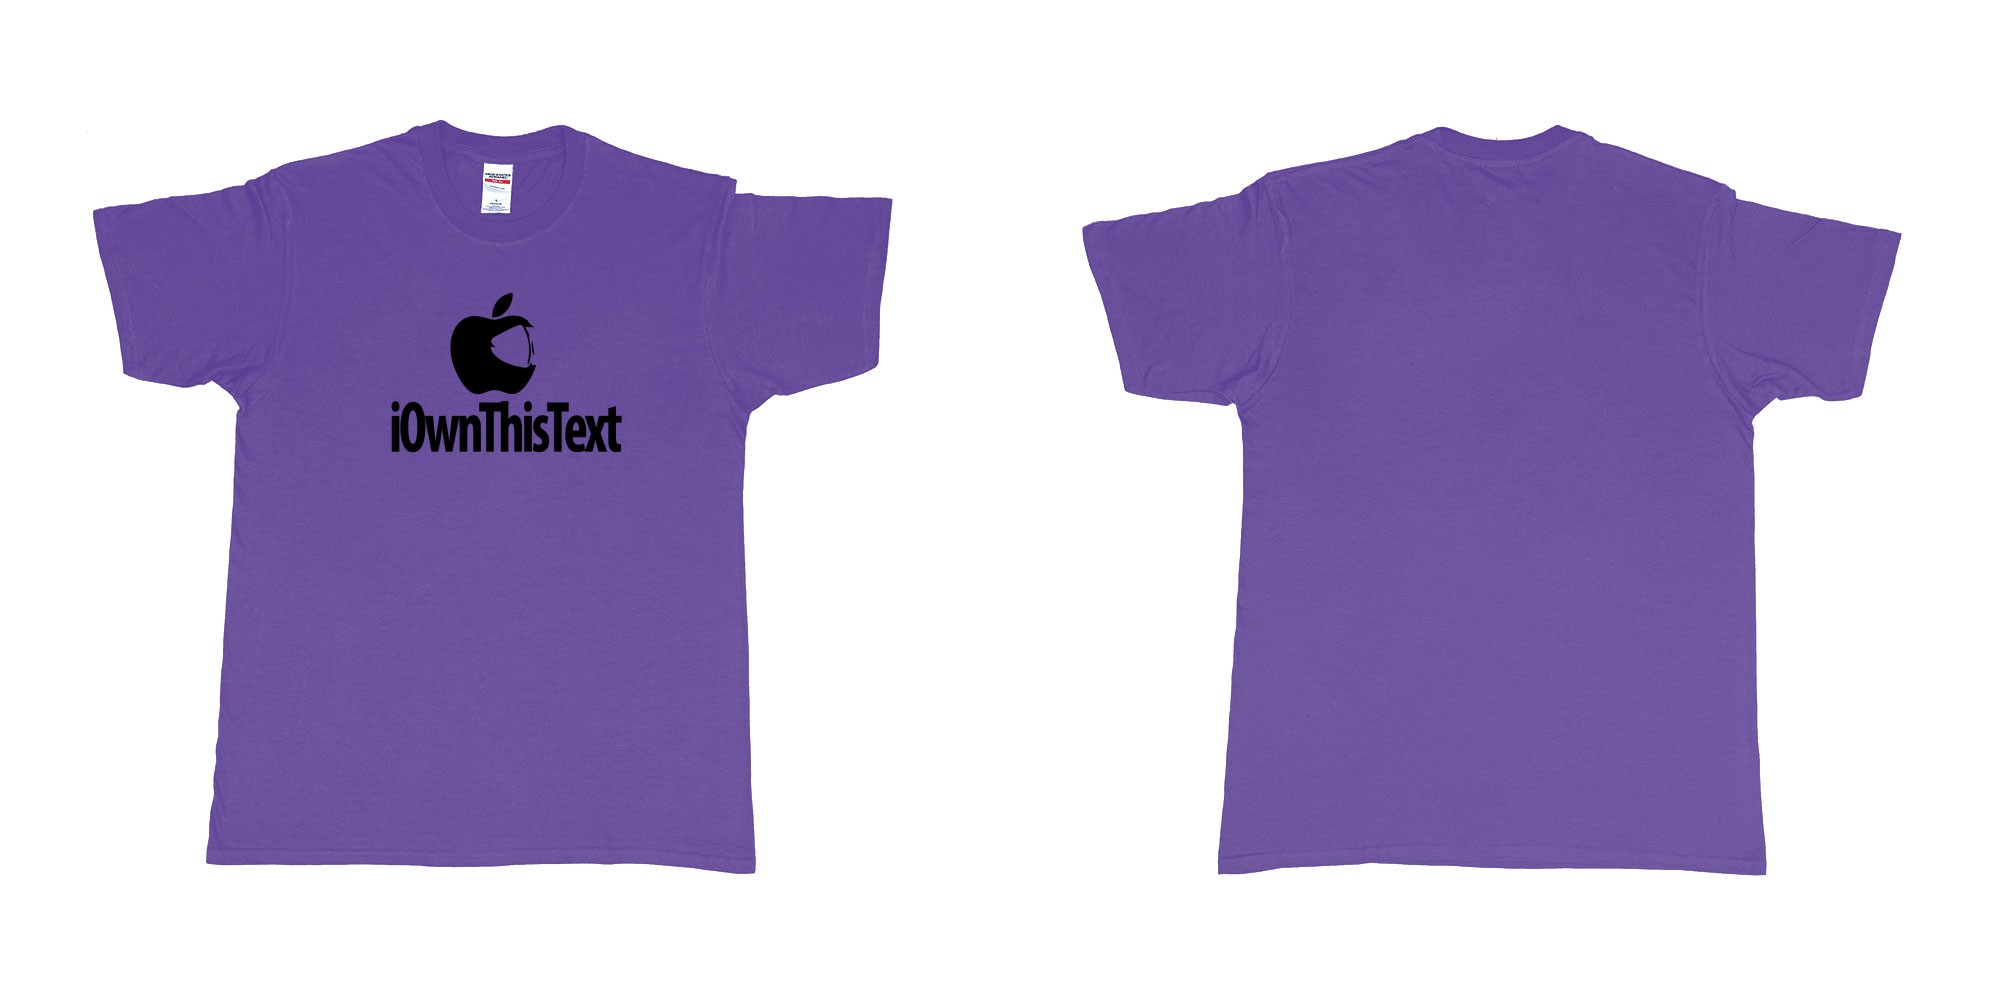 Custom tshirt design Iwanker in fabric color purple choice your own text made in Bali by The Pirate Way